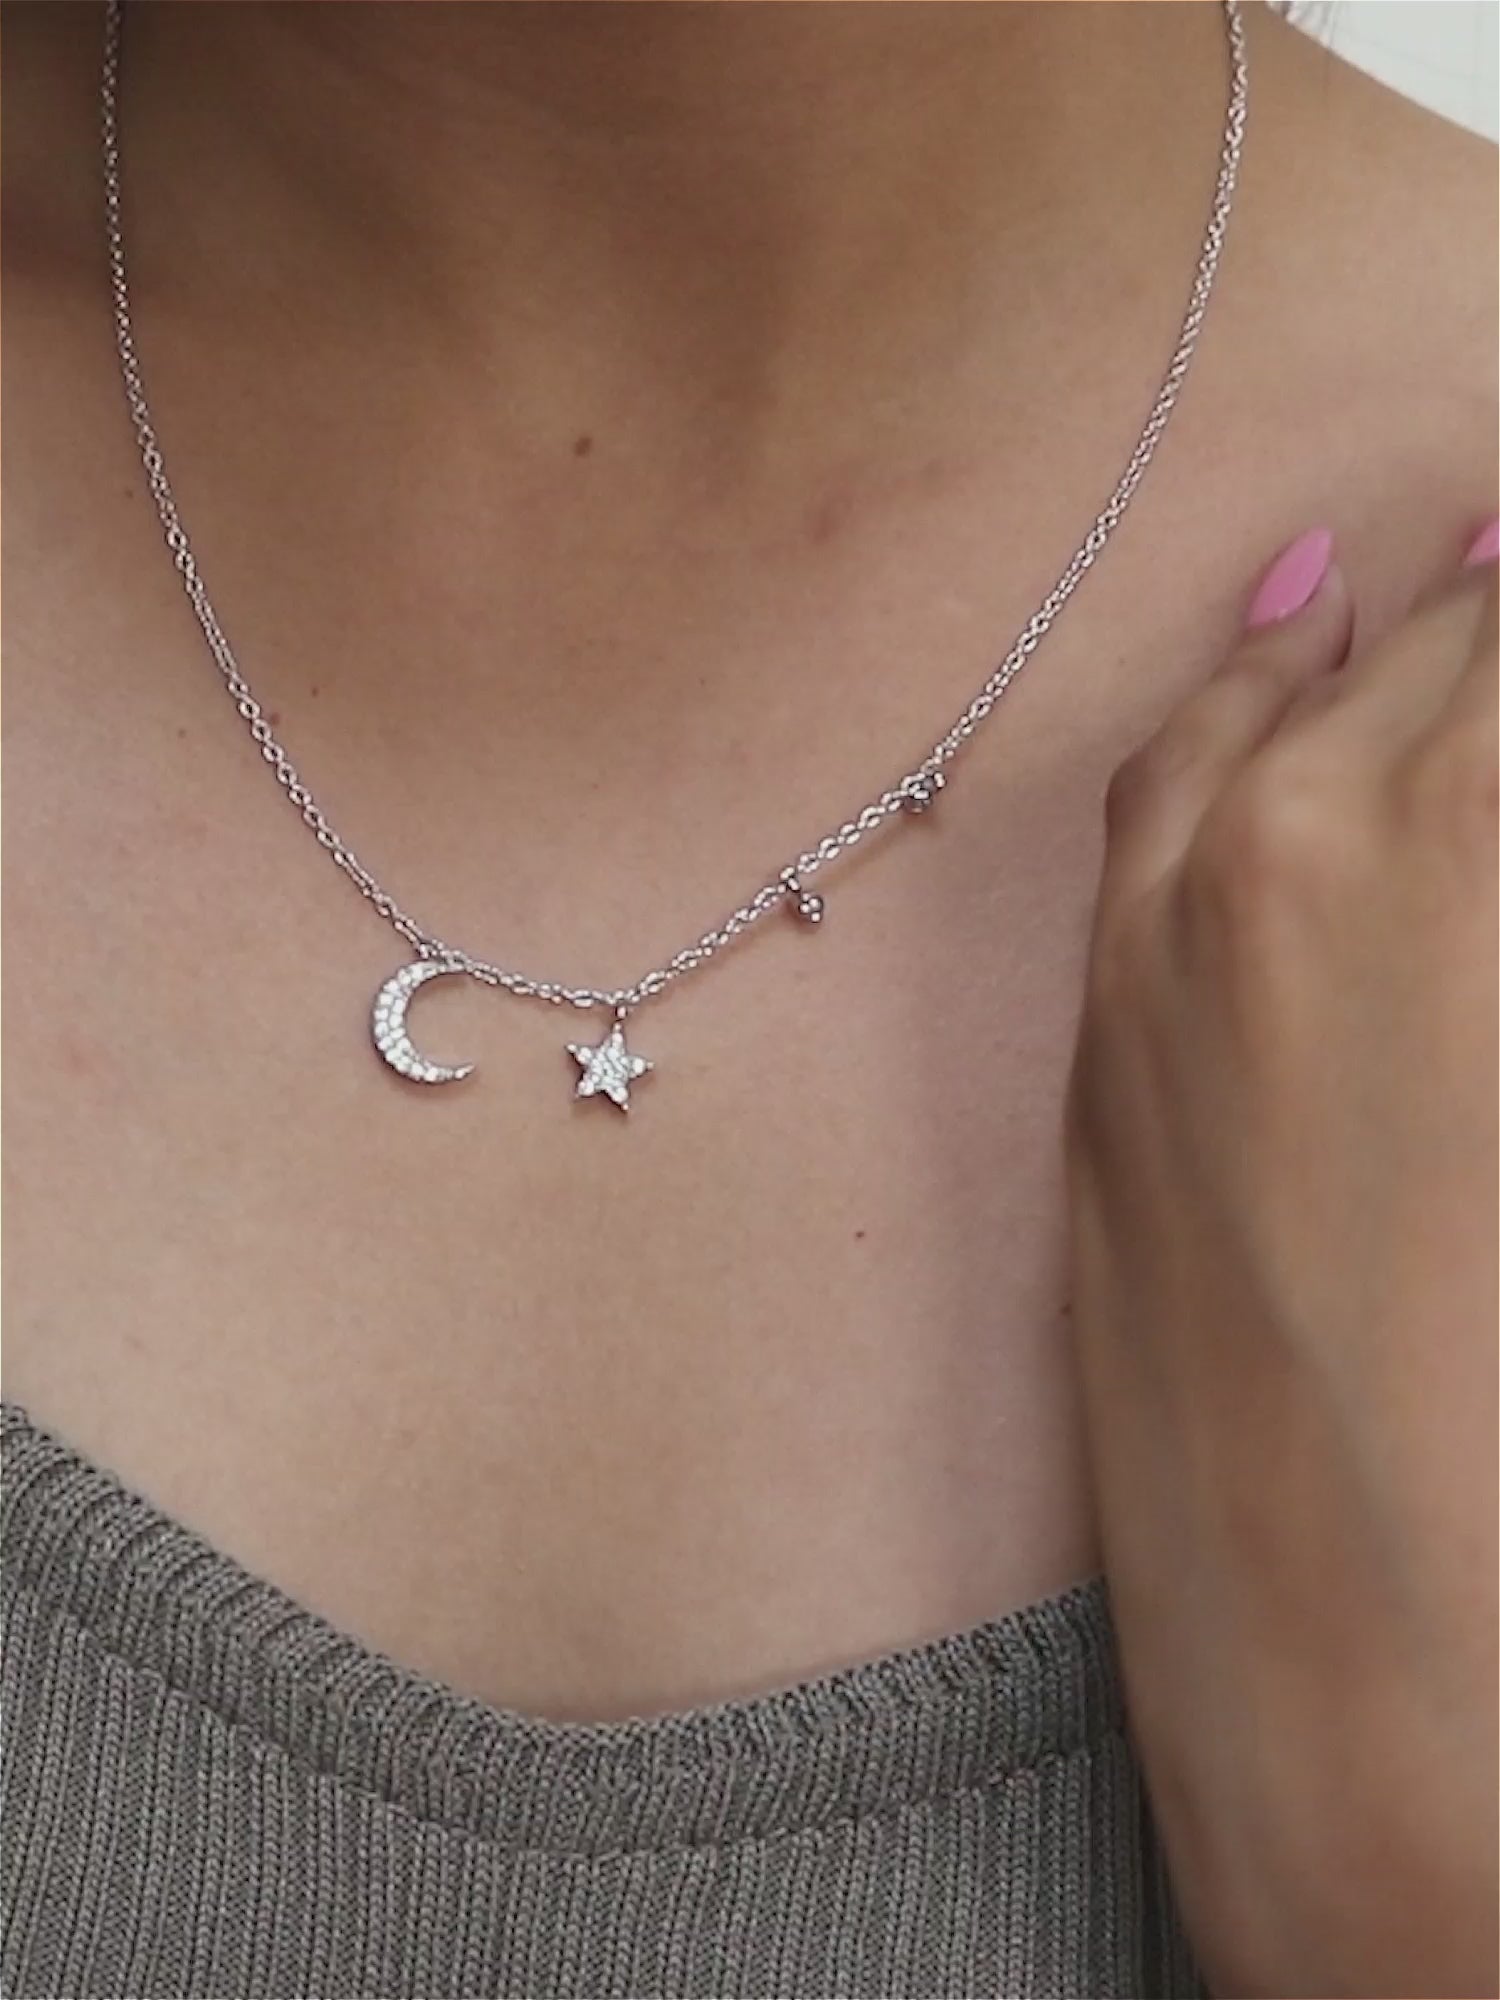 STAR AND MOON PENDANT WITH CHAIN